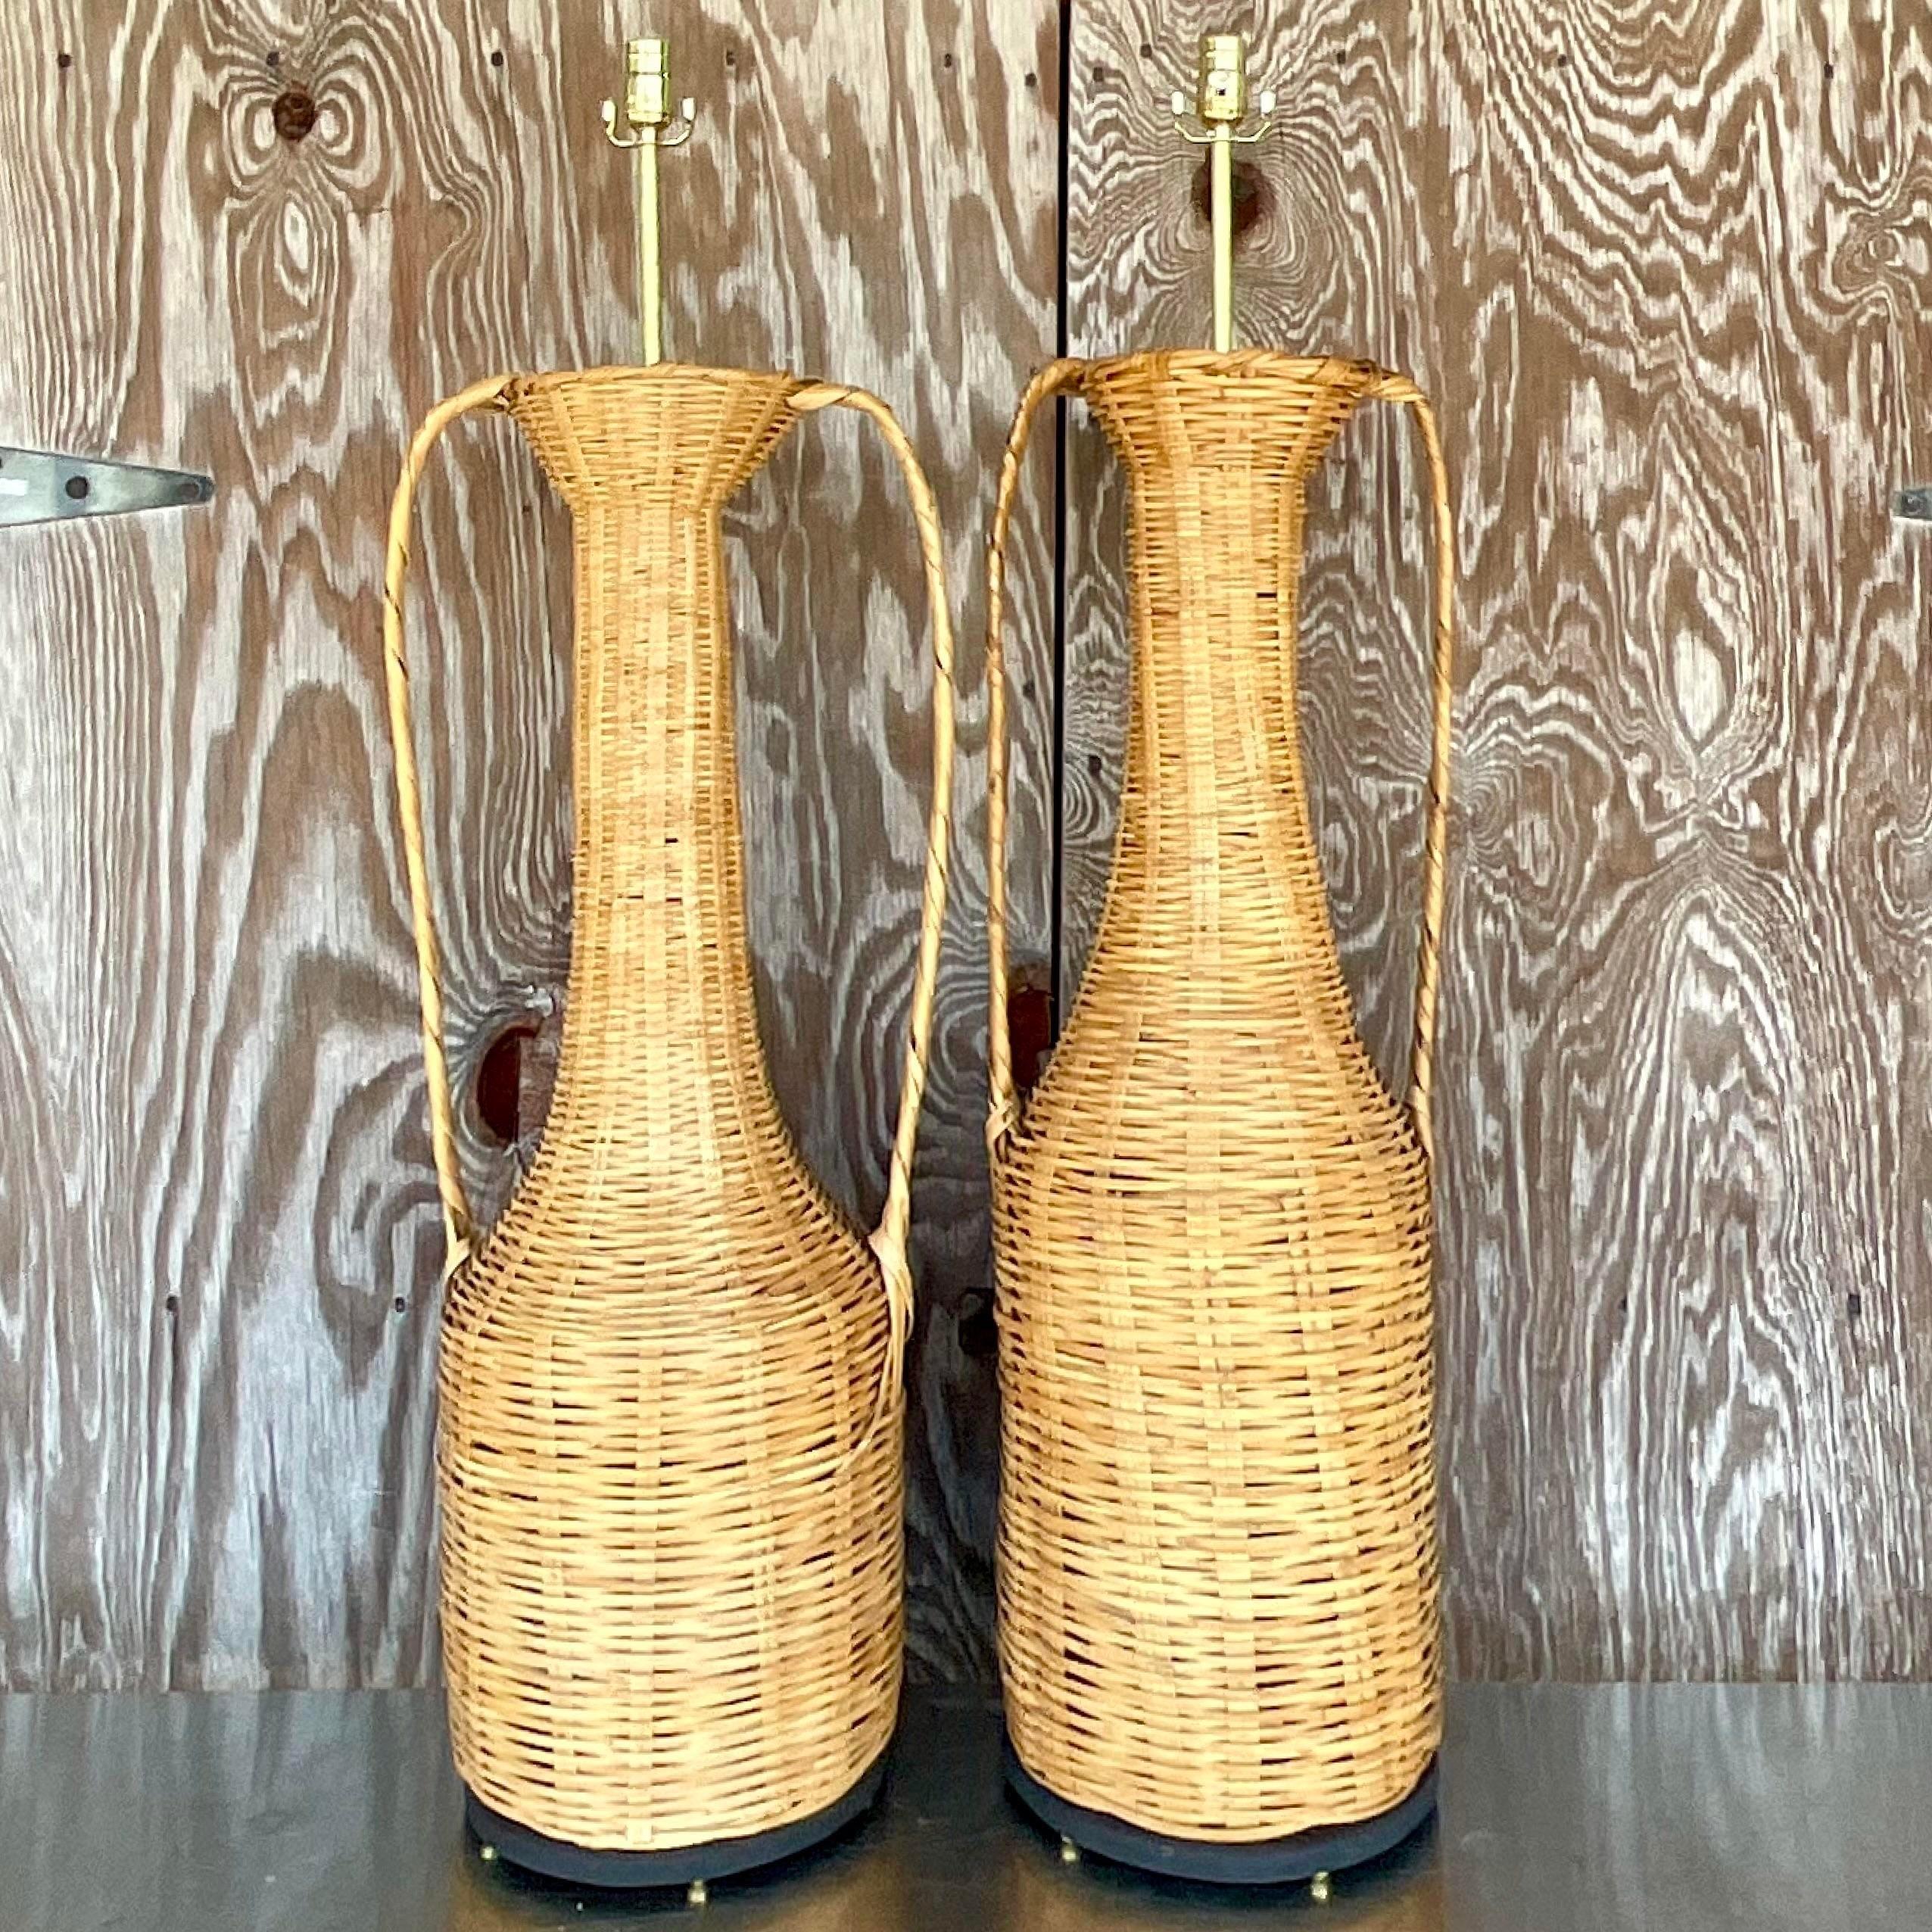 Philippine Vintage Boho Woven Rattan Urn Lamps - Set of 2 For Sale